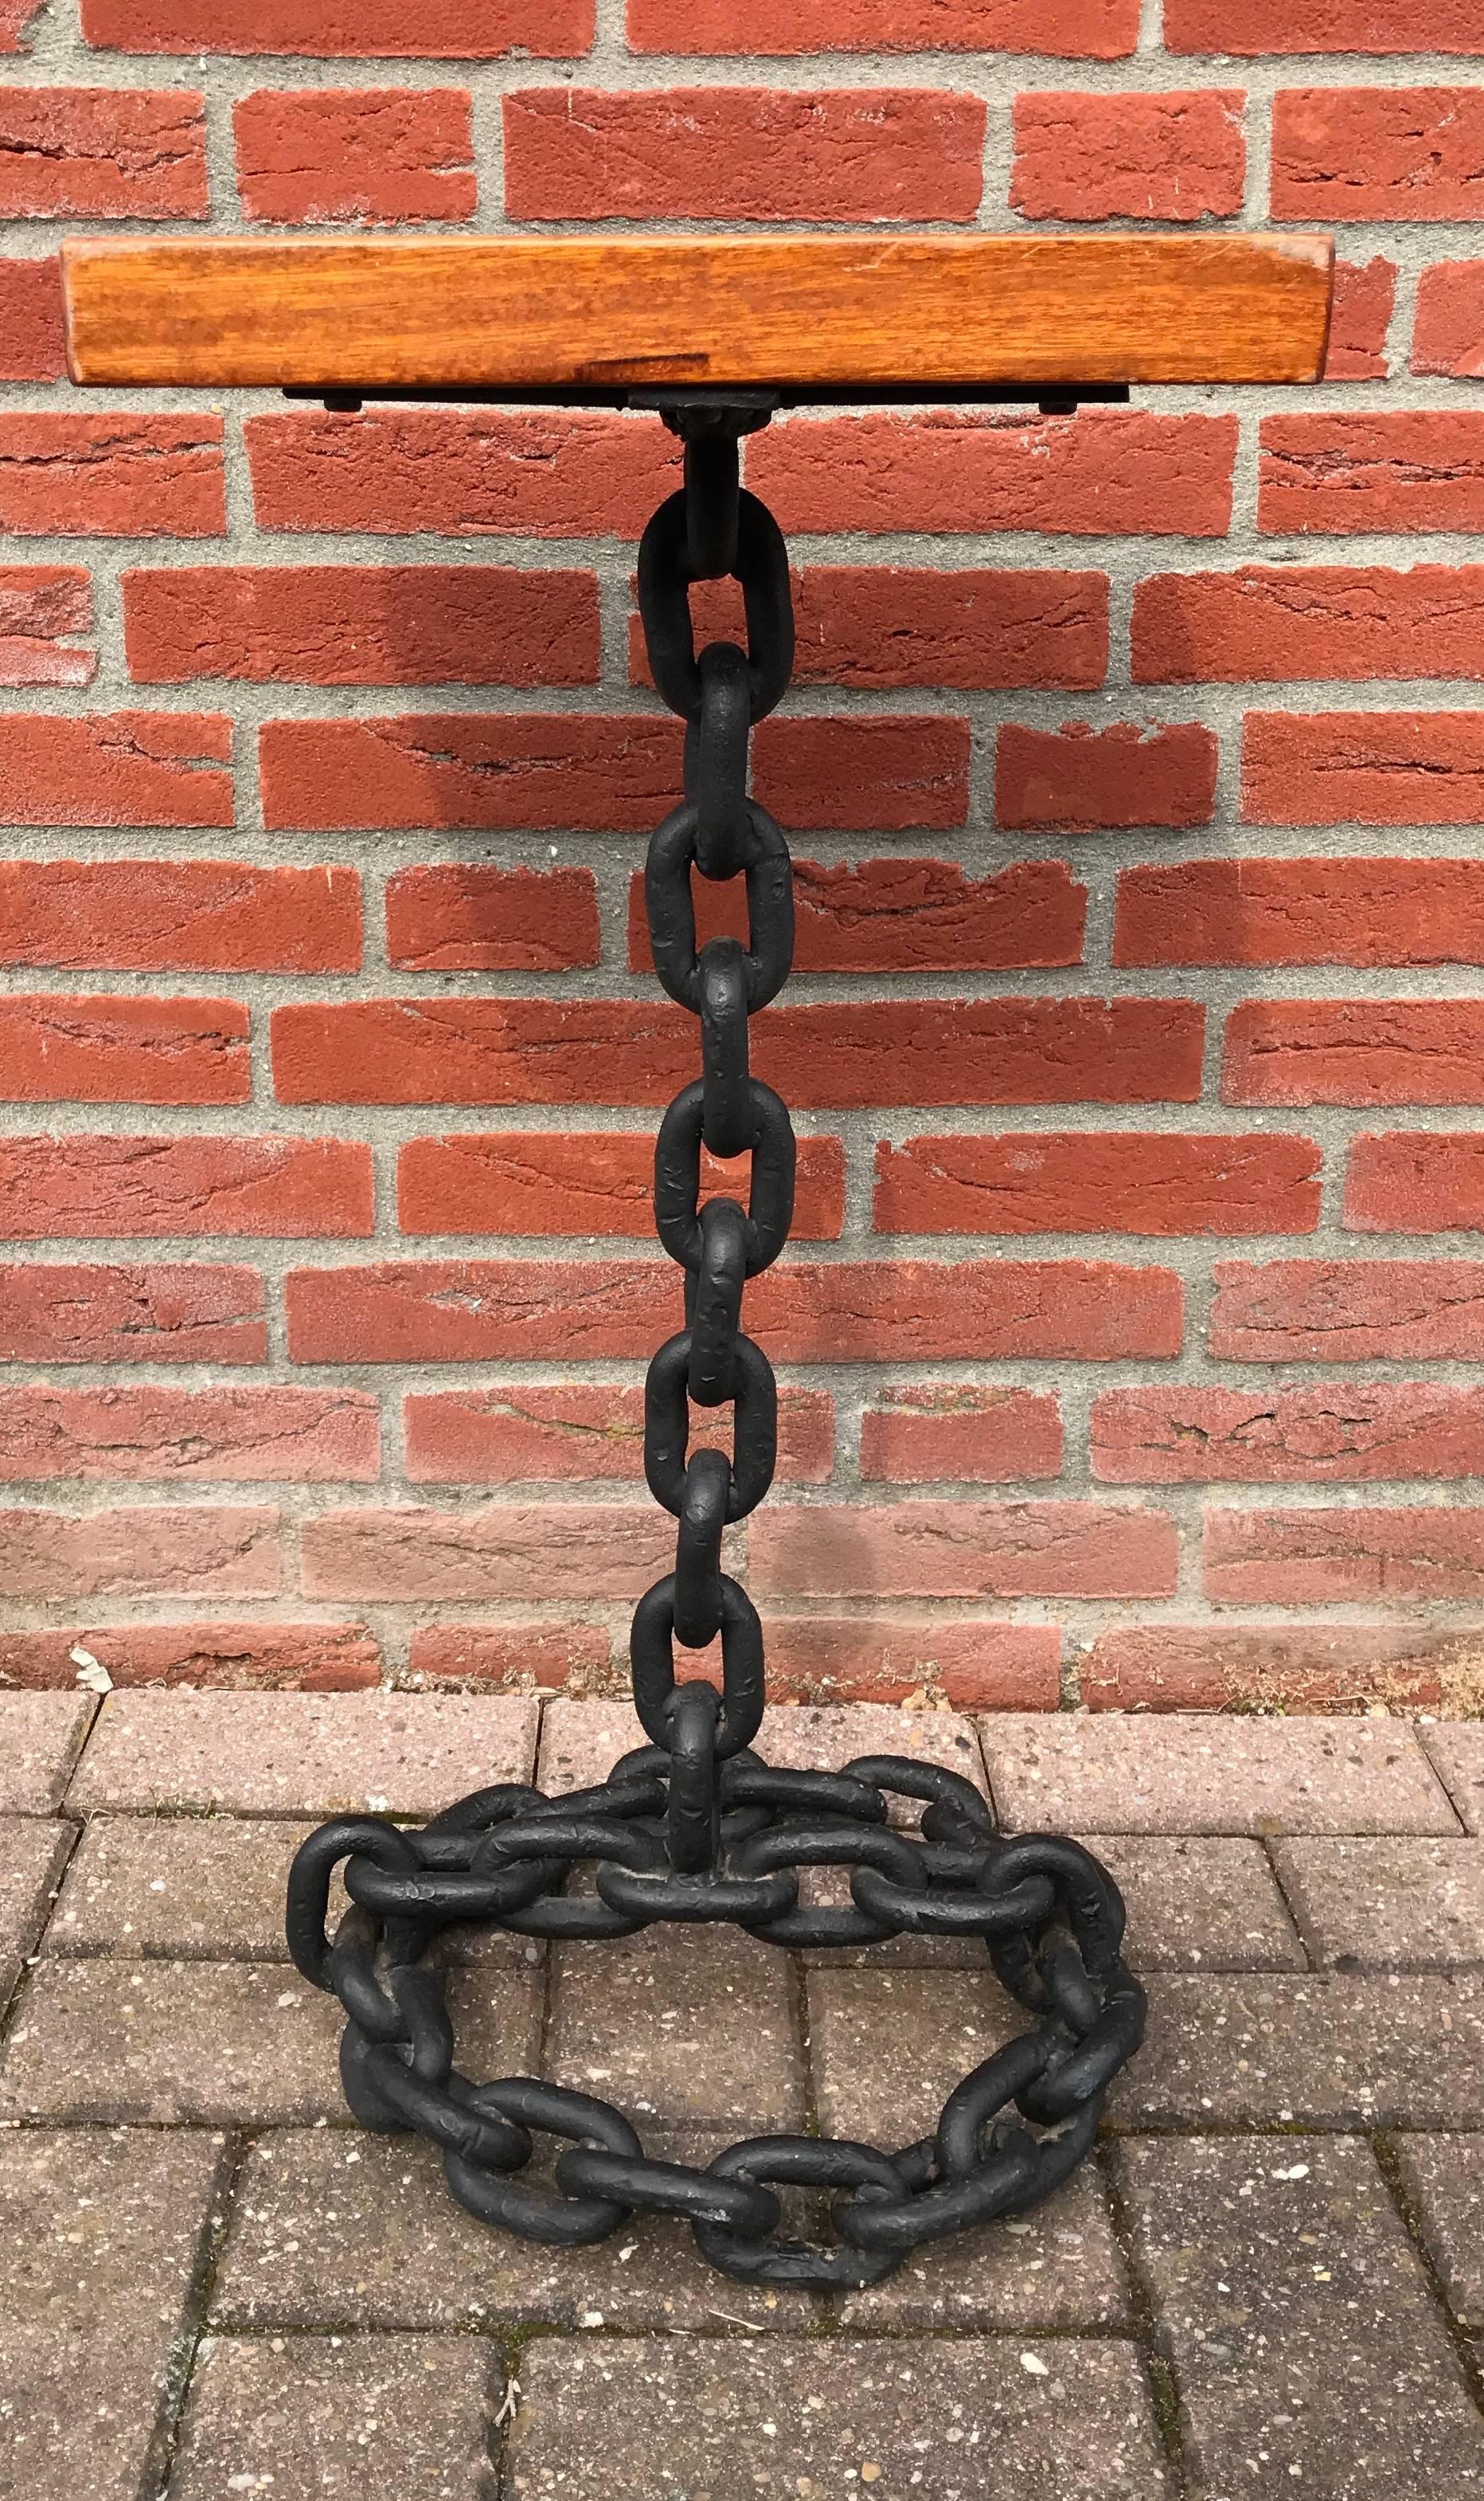 Rare and decorative metal chain table in the style of Franz West (1947-2012).

This one is for the lovers of art and unusual design with a practical purpose. This nautical theme stand of iron and wood creates a bit of an optical illusion. Anyone who